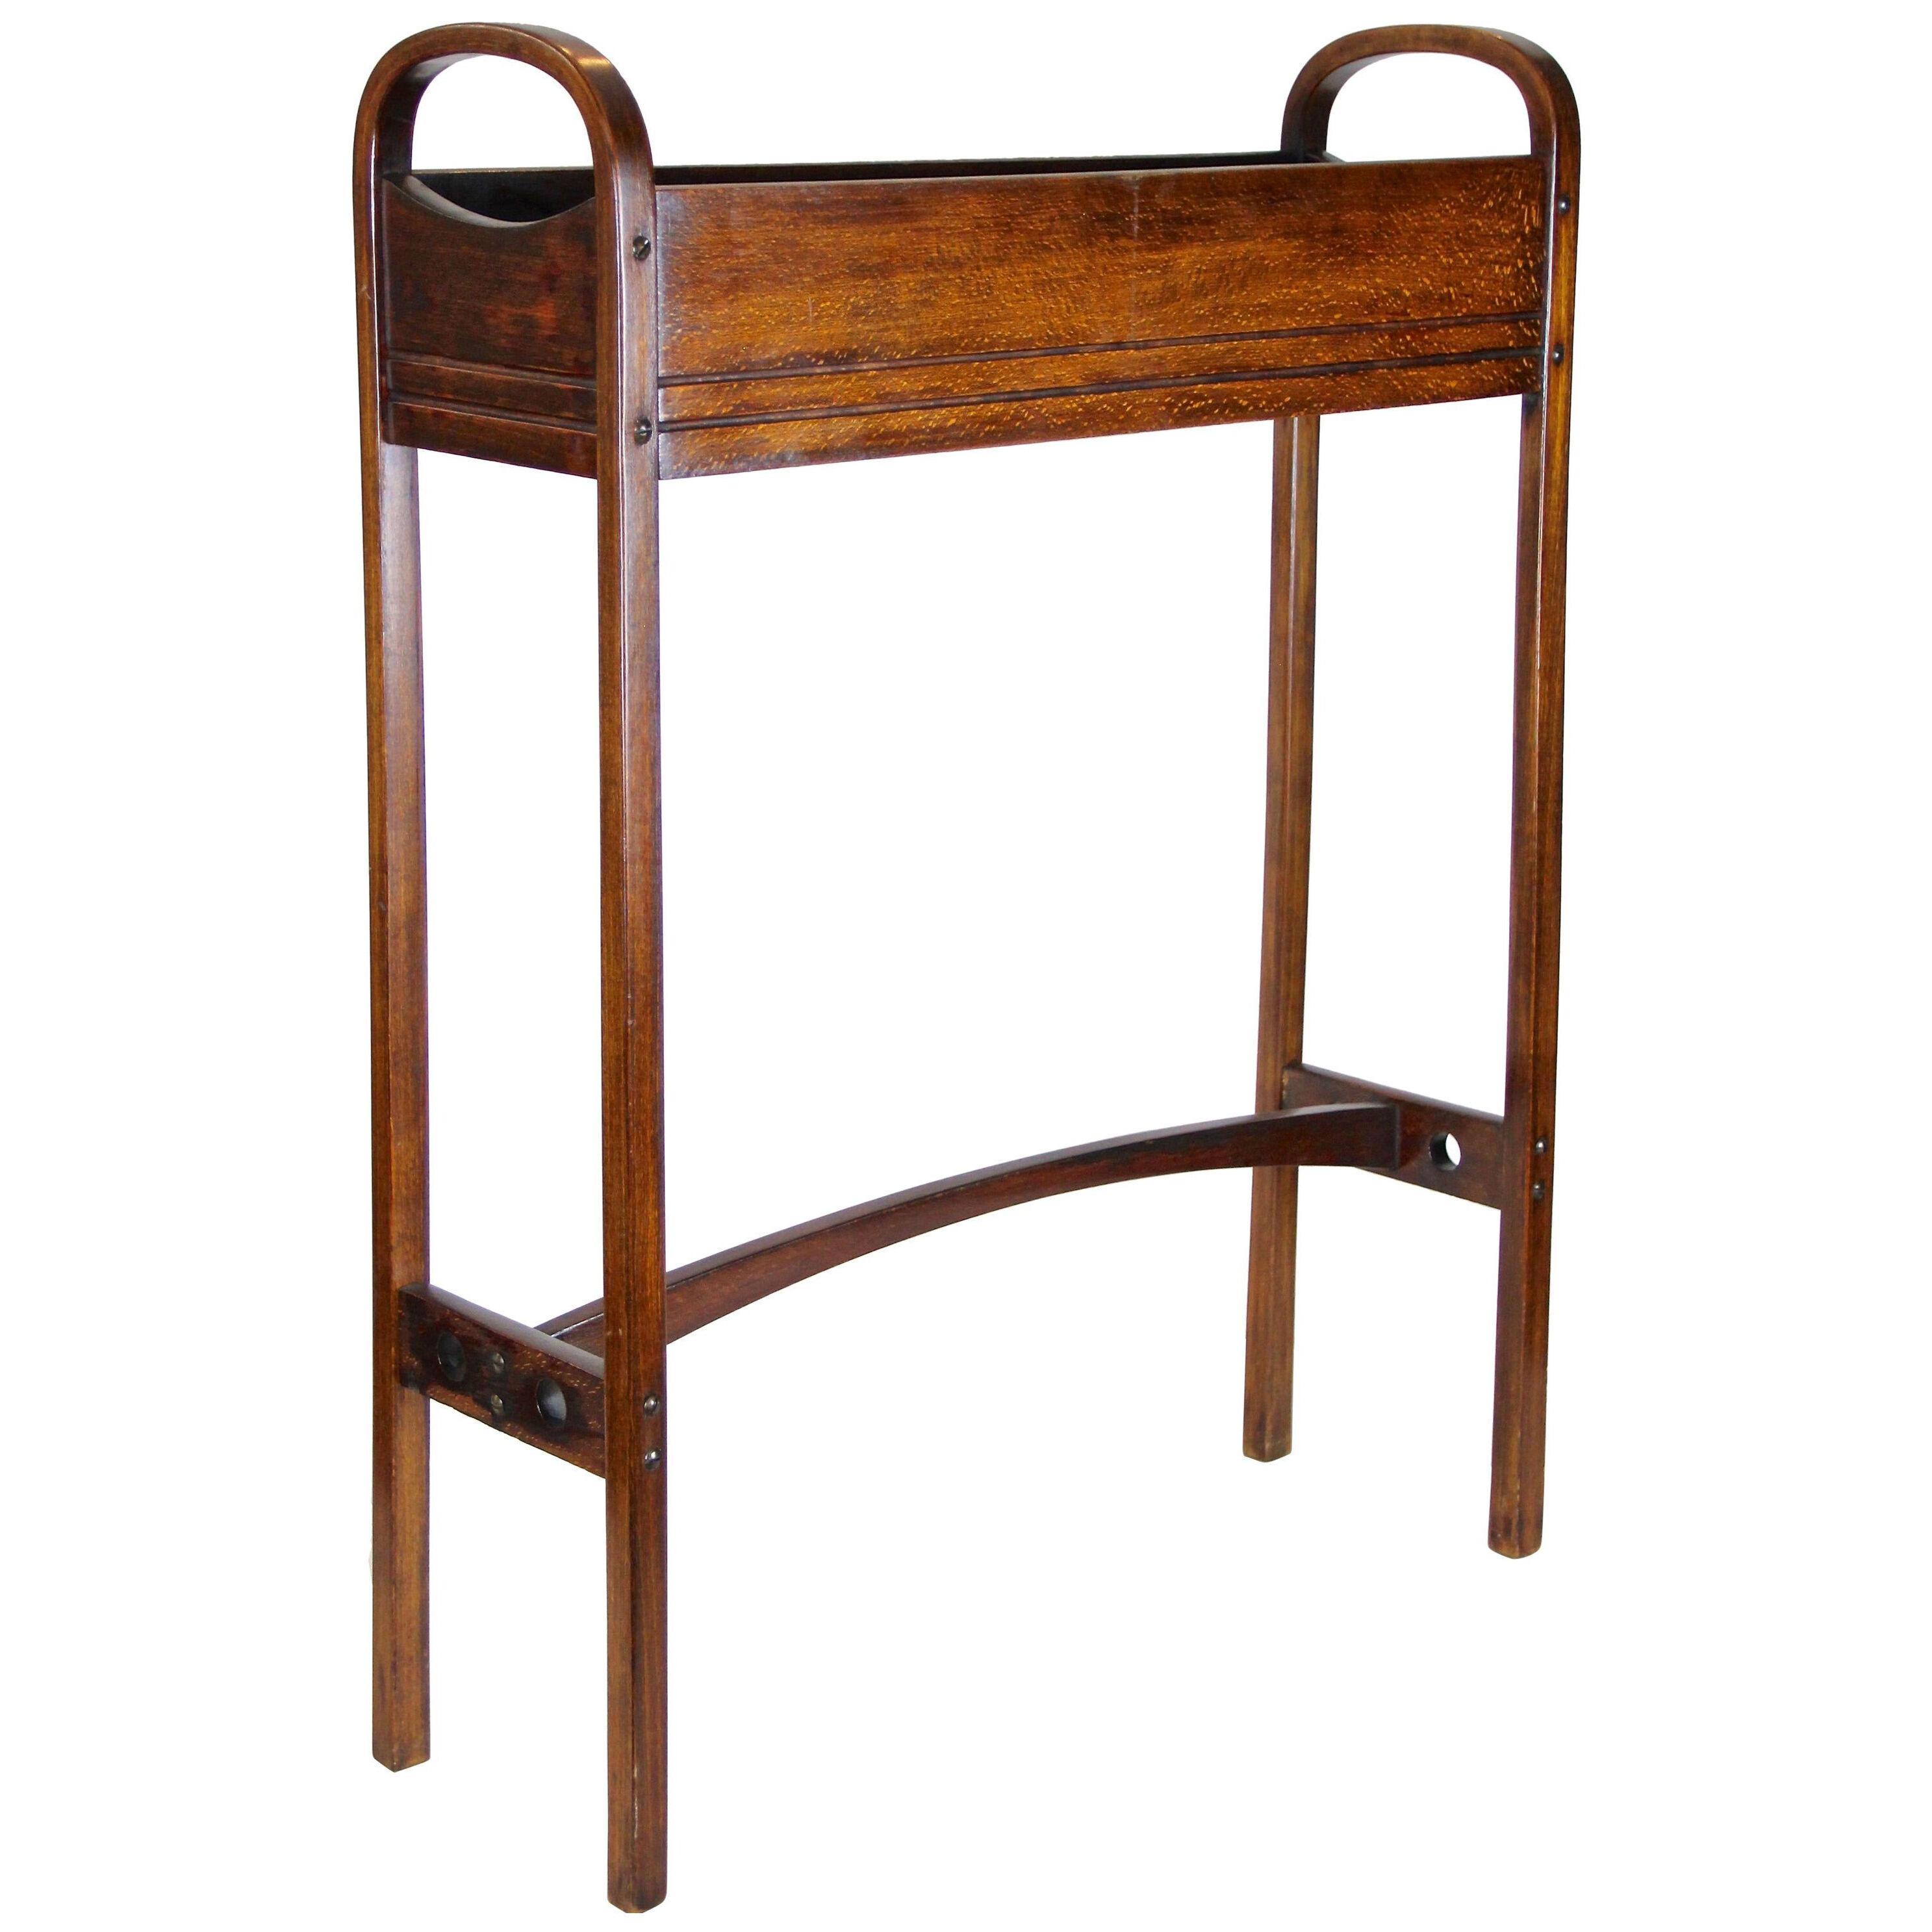 Bentwood Plant Stand or Flower Tub Mod. No. 1 by Thonet, Austria, circa 1915